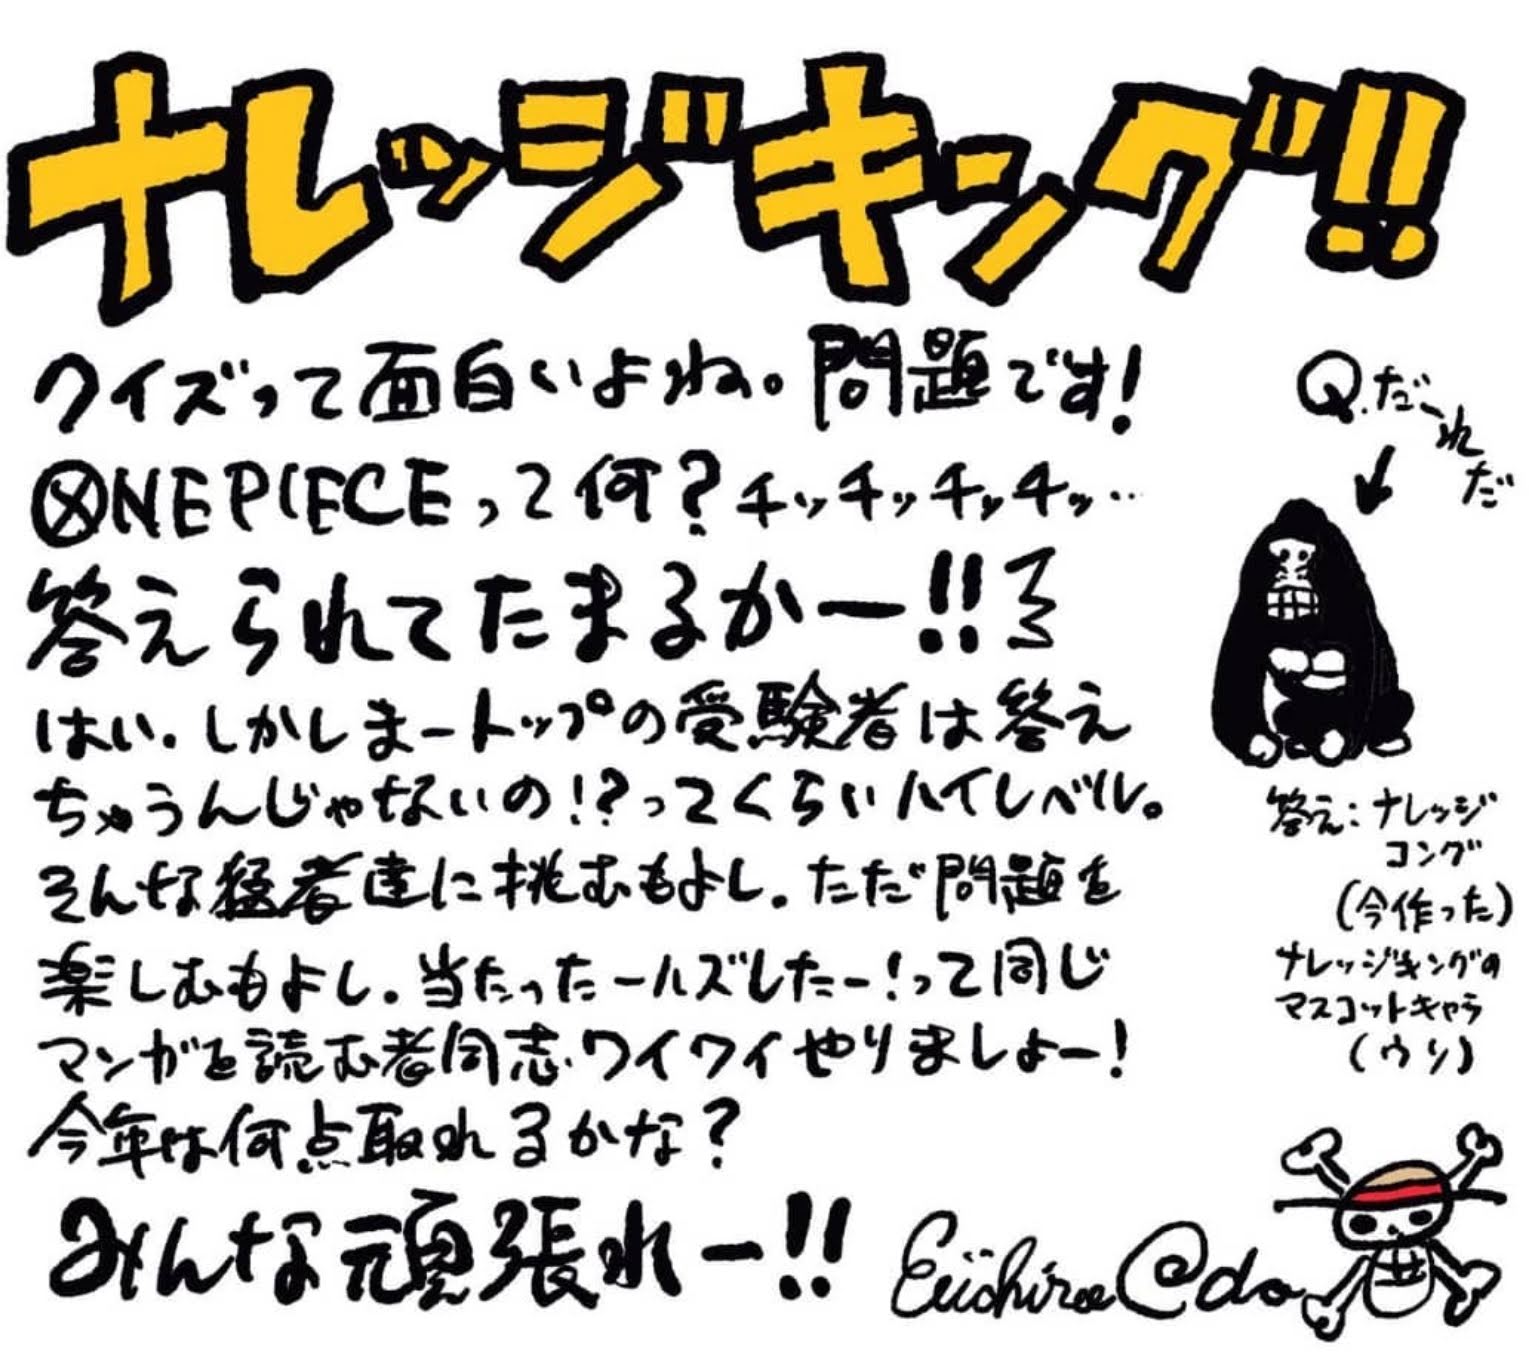 Sandman Oda Has Just Made A Message About Op Knowledge King Quiz Competition That Will Be Held On October 24th He Jokingly Asks Us What Is One Piece But At